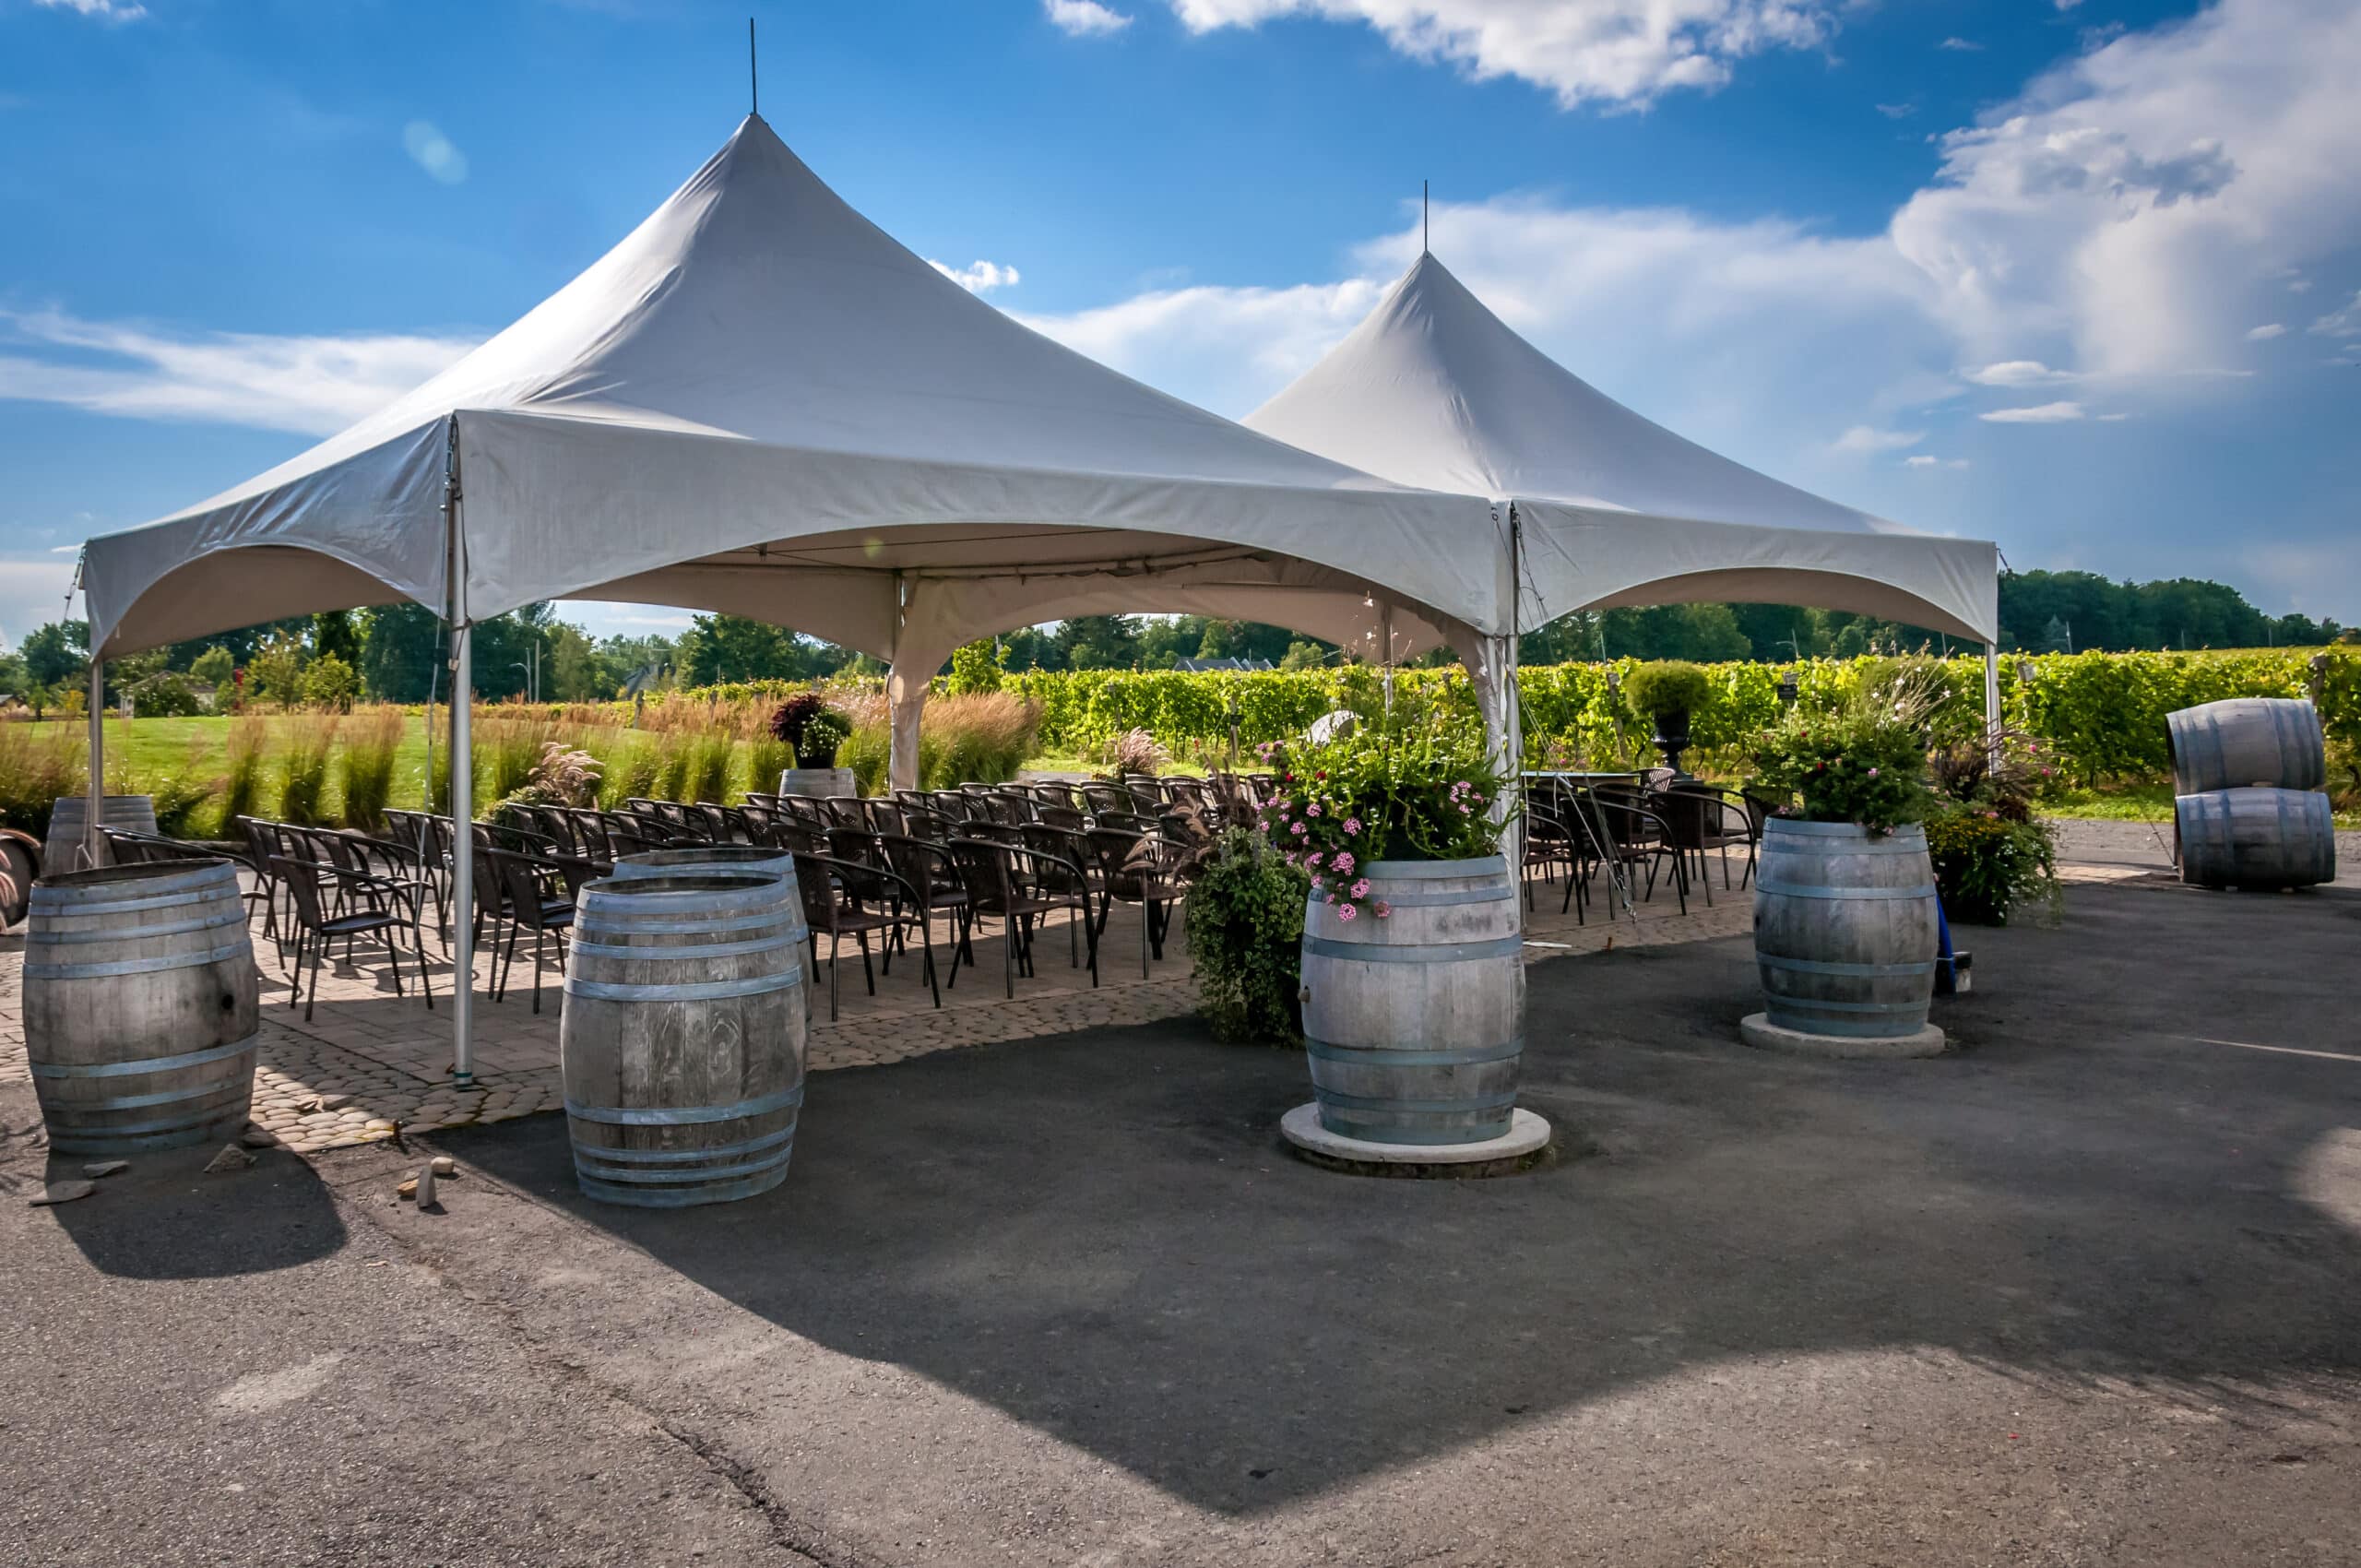 Outdoor Napa event under white marquee patrolled by Global Risk Solutions' security personnel.